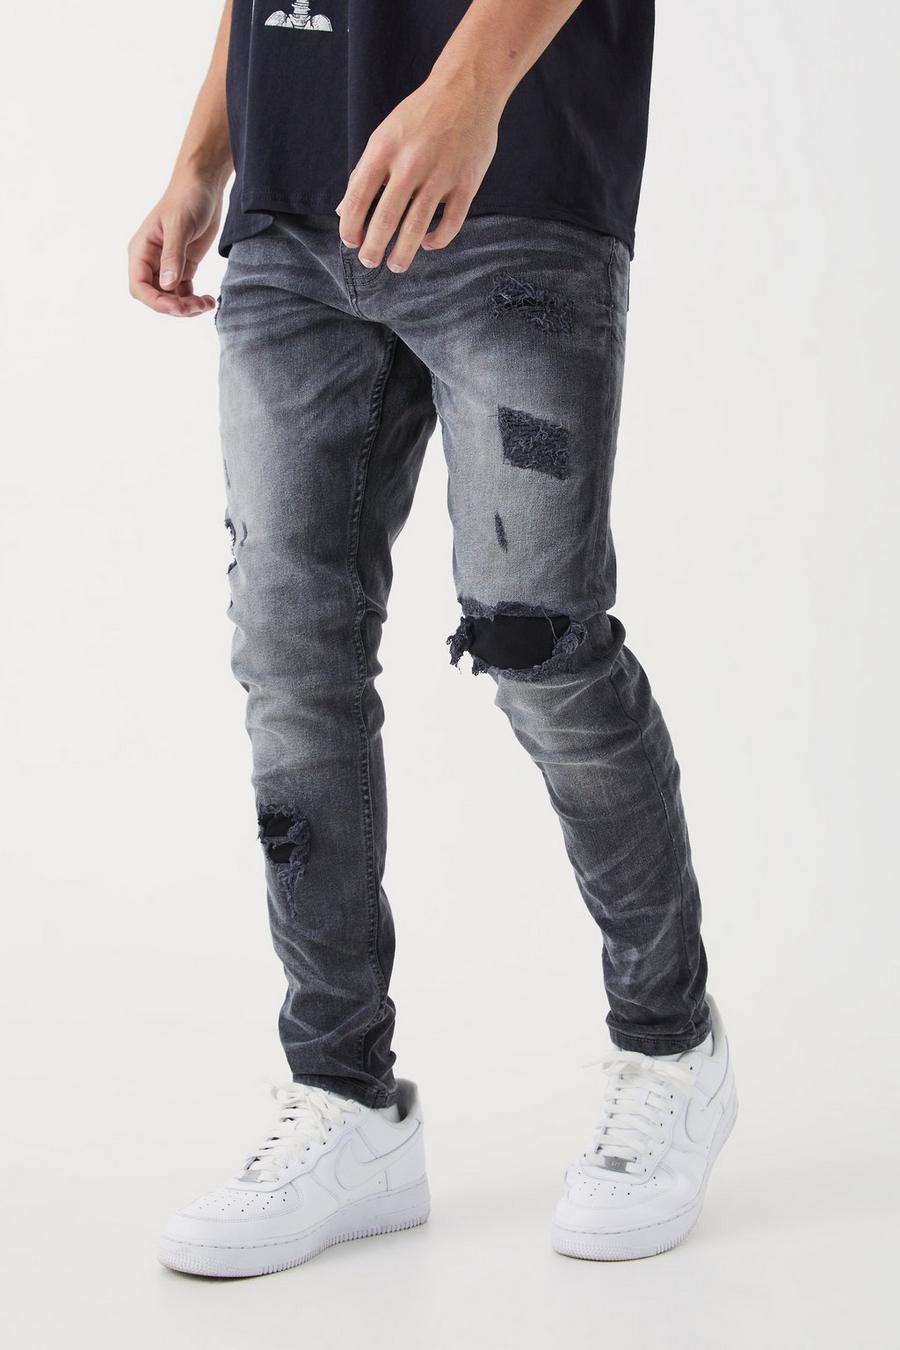 2021 NEW Mens Black Skinny Ripped Ripped Jeans For Men Casual Hip